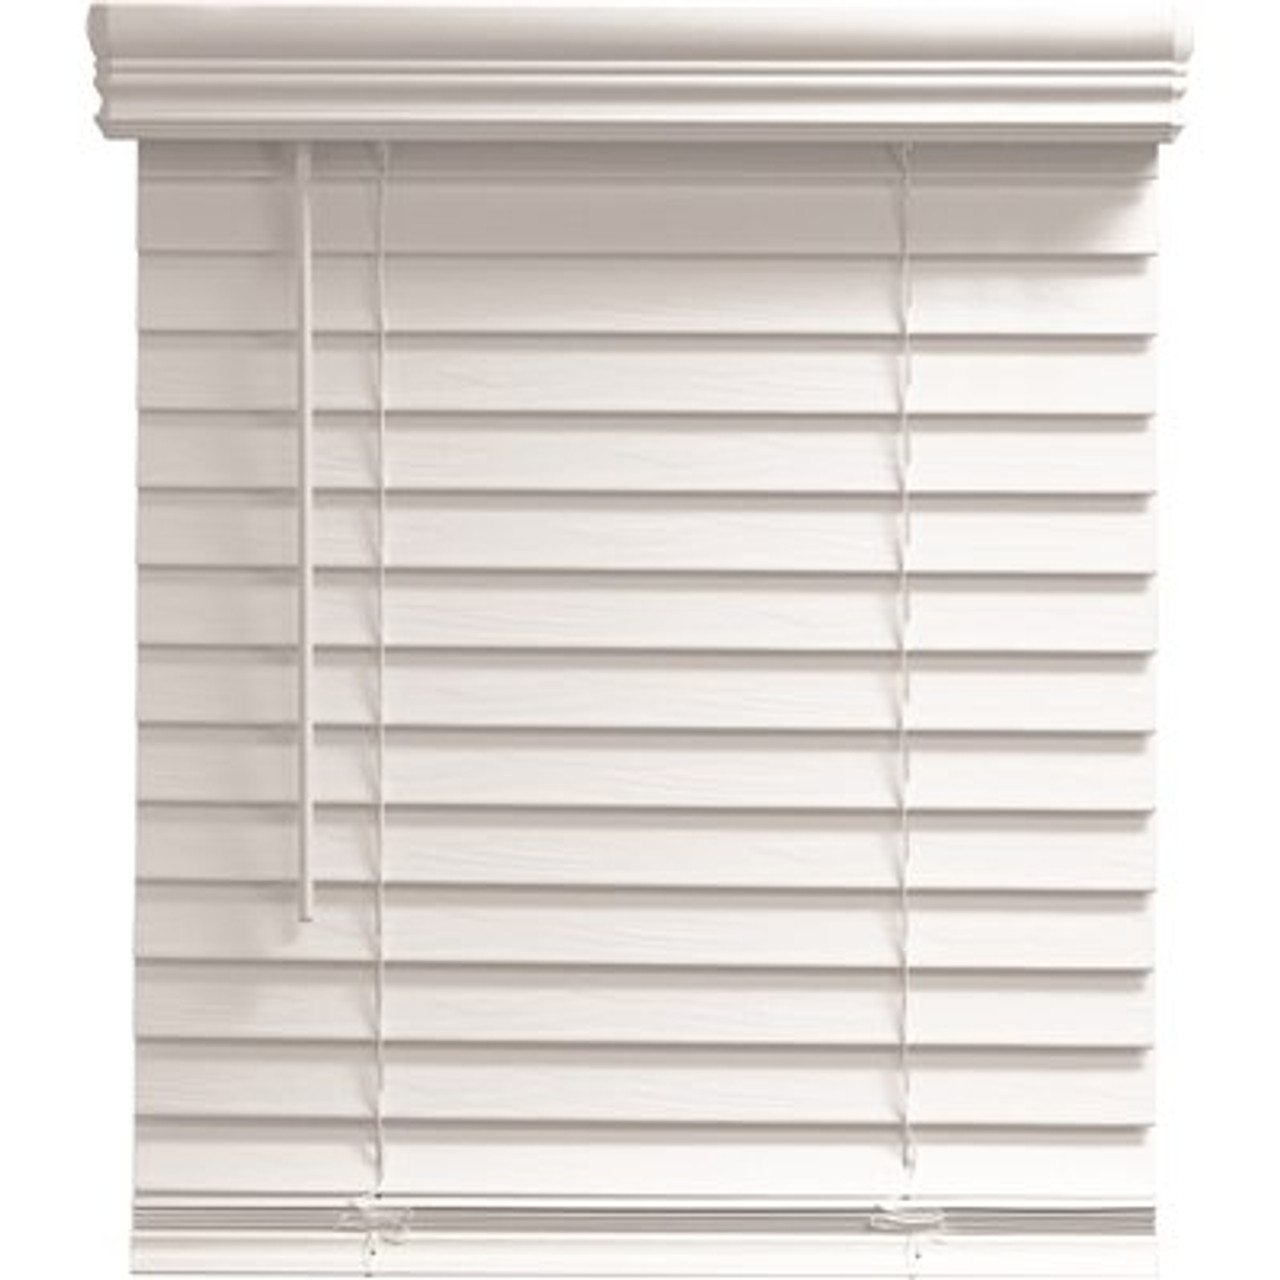 Champion TruTouch 42x84" Cordless 2" Faux Wood Blind White